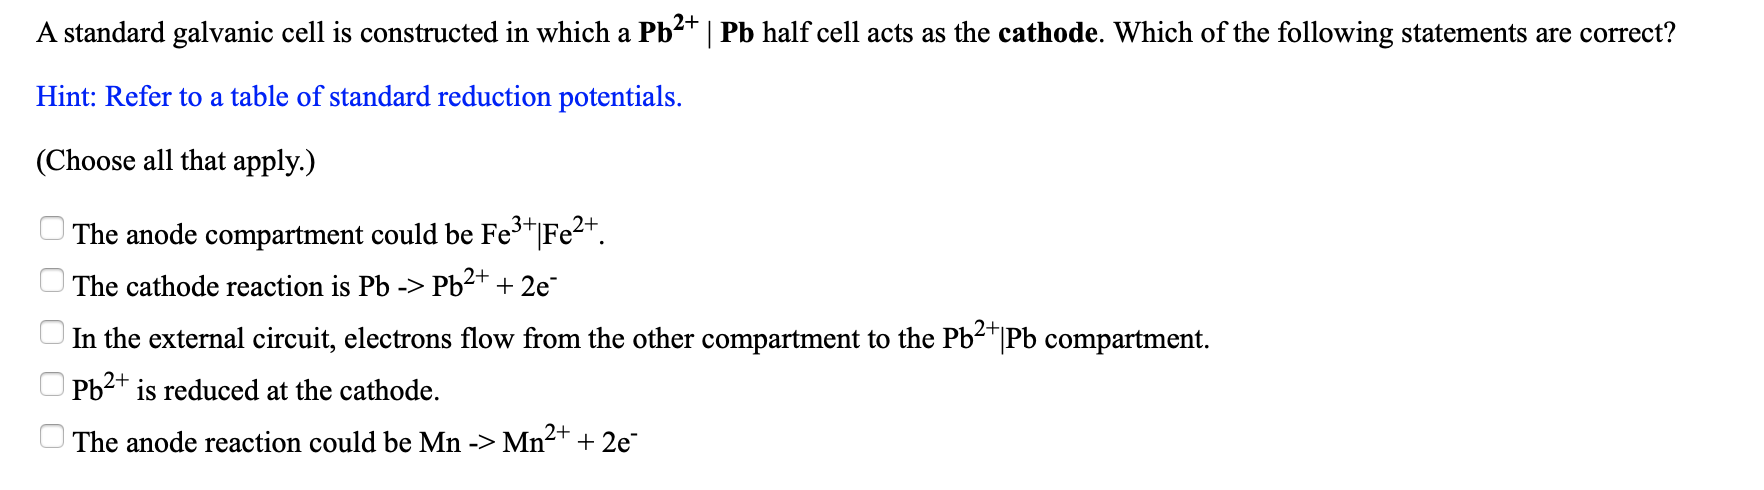 cathode reaction for fe and pb